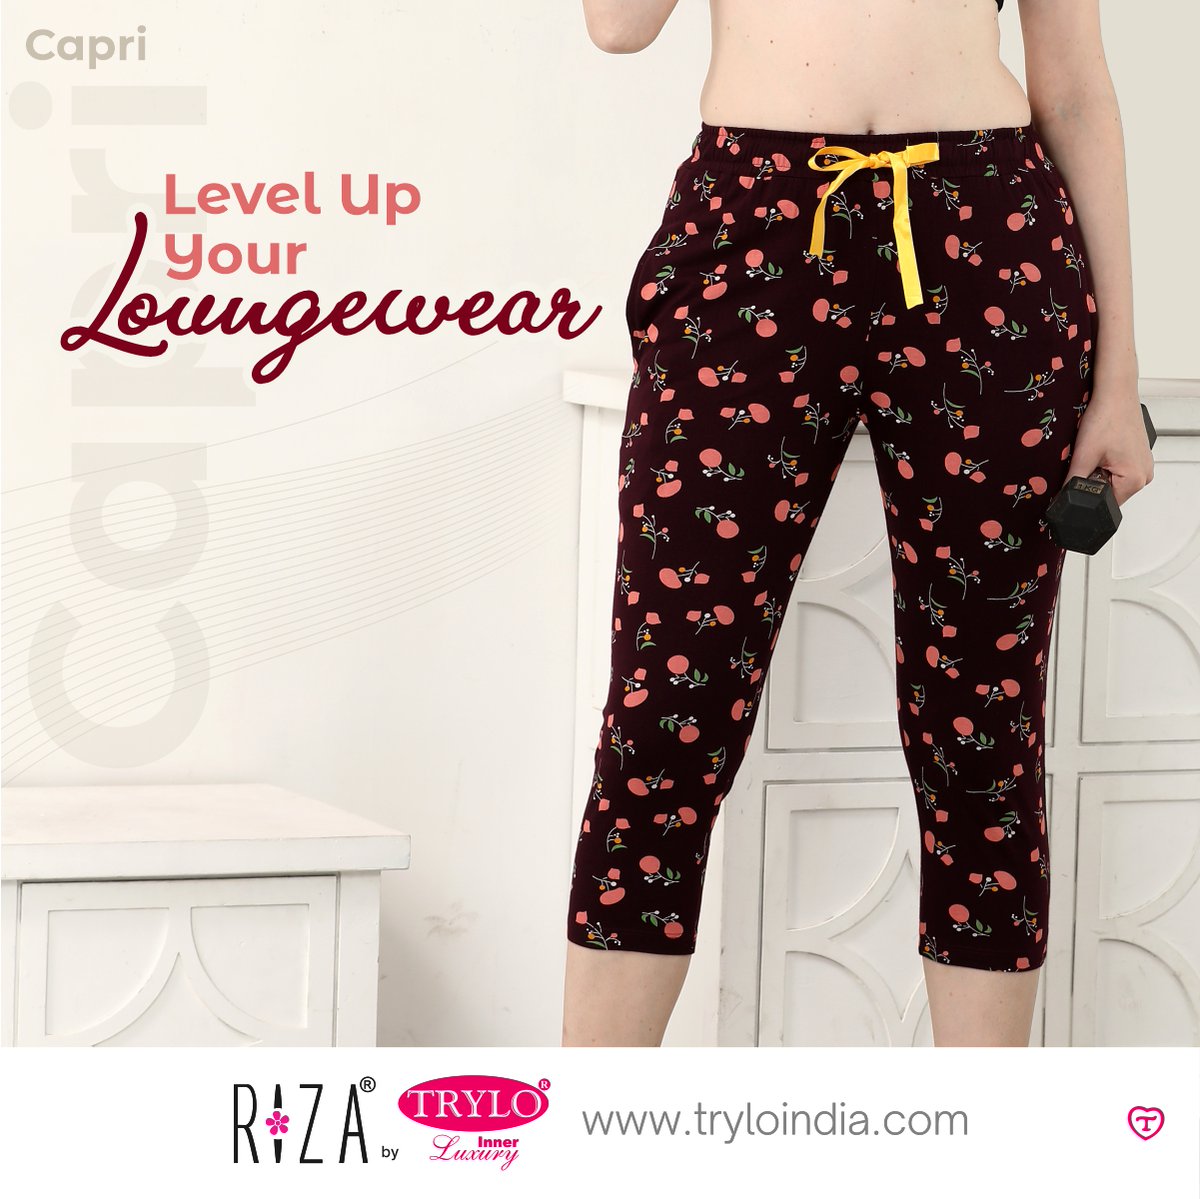 Trylo Riza Capri takes loungewear to new heights, offering perfect fit and all-day comfort. It's the cozy upgrade you deserve. 

Product shown - Capri CP-7043

#TryloIndia #TryloIntimates #RizaIntimates #RizabyTrylo #Capripants 
 #Loungewea #LoungewearLove